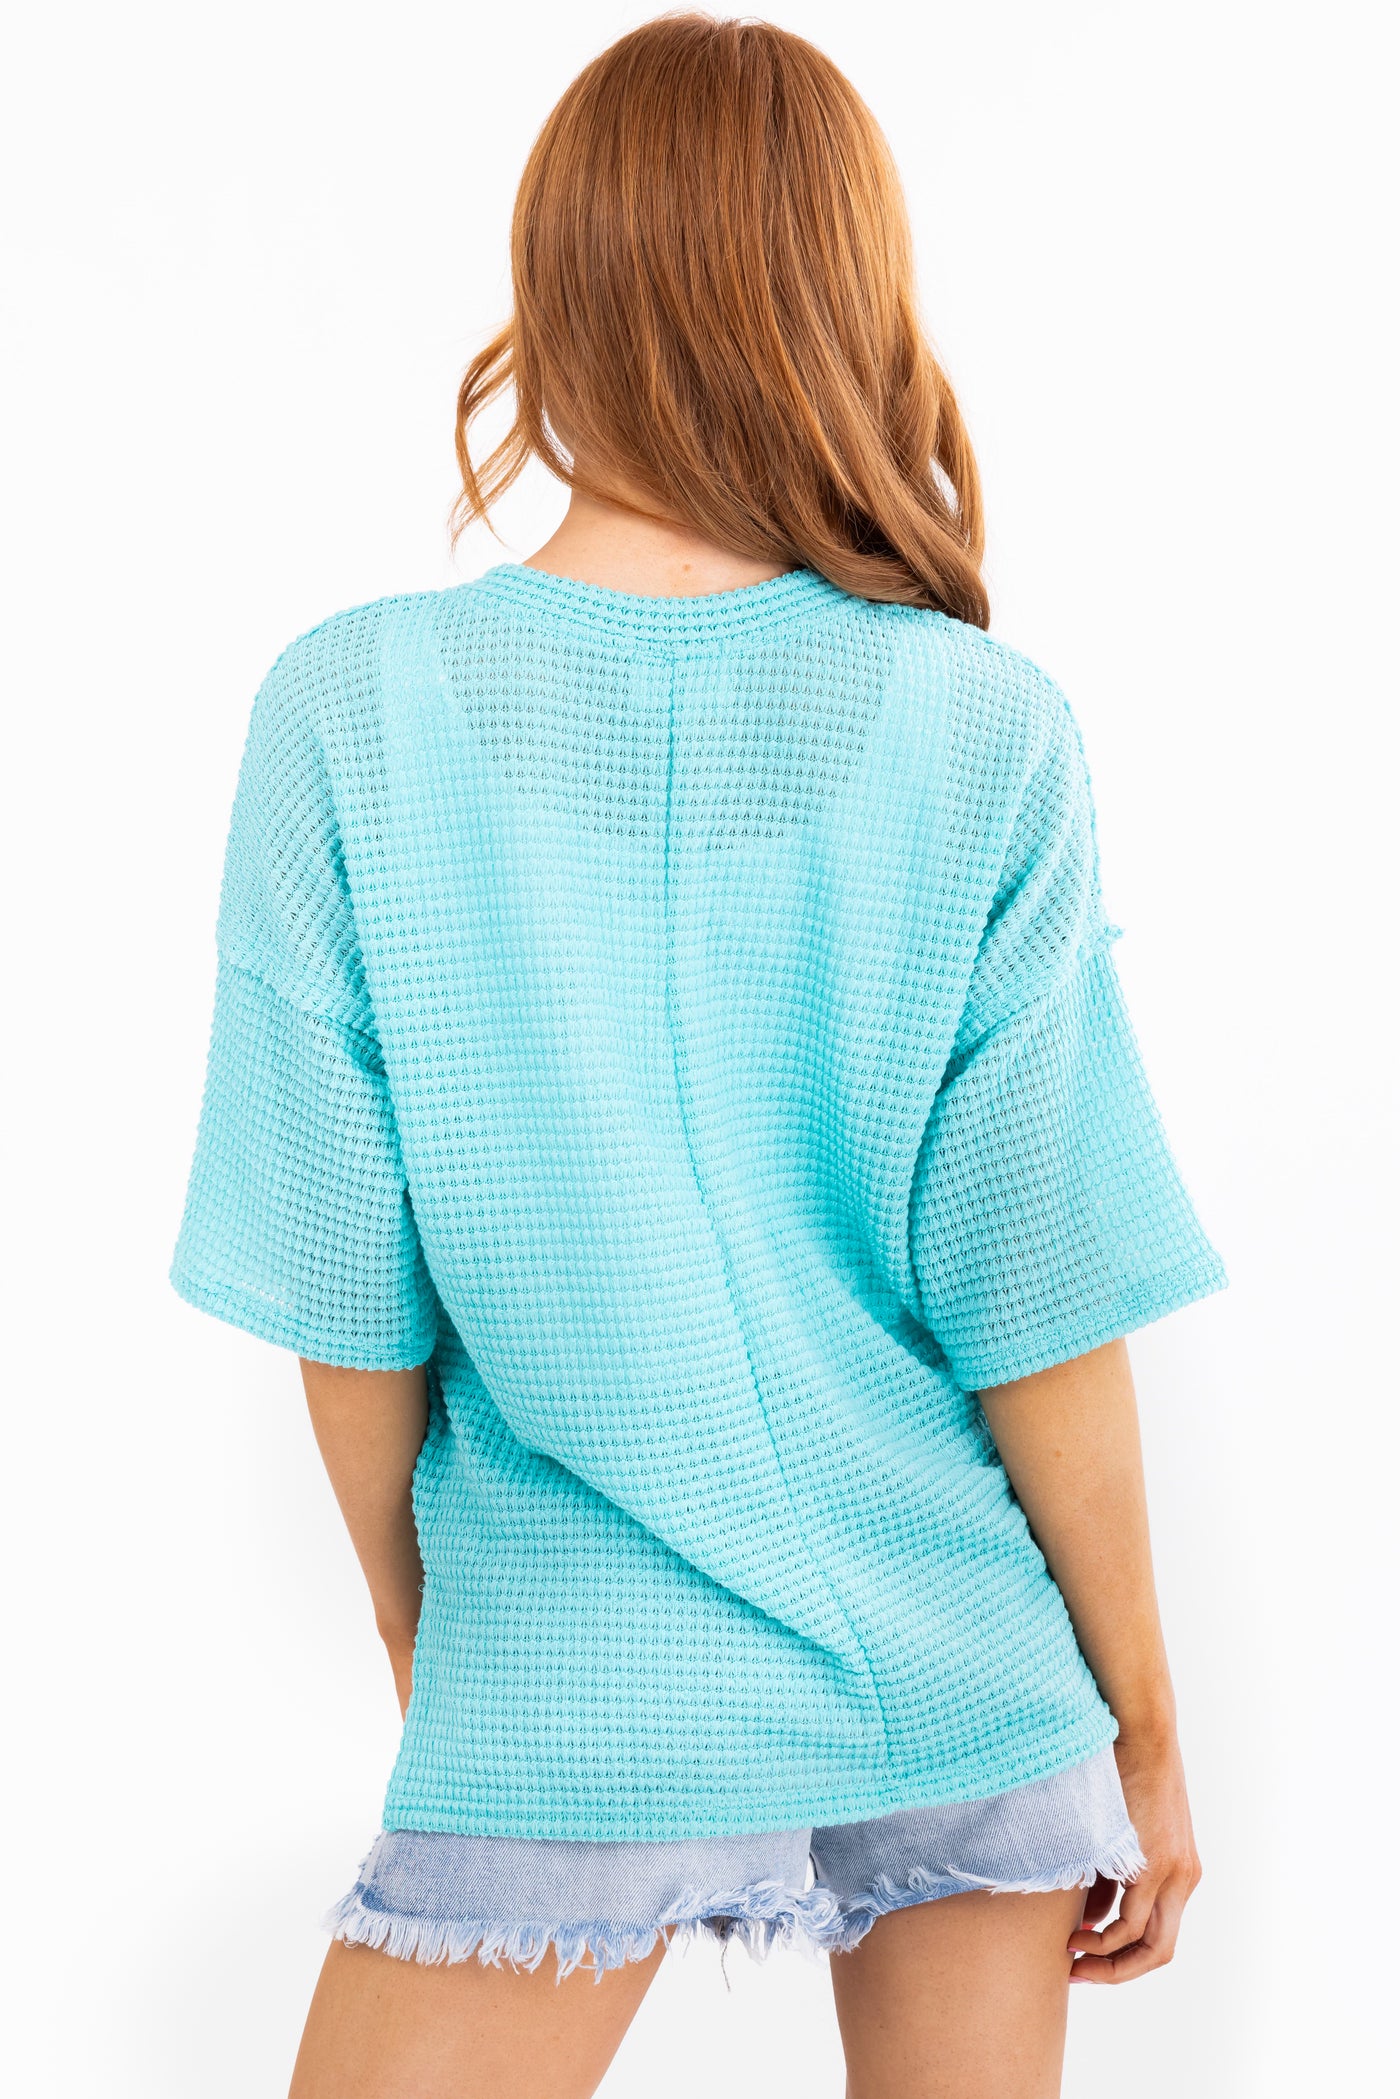 Turquoise Waffle Knit Half Sleeve Button Top